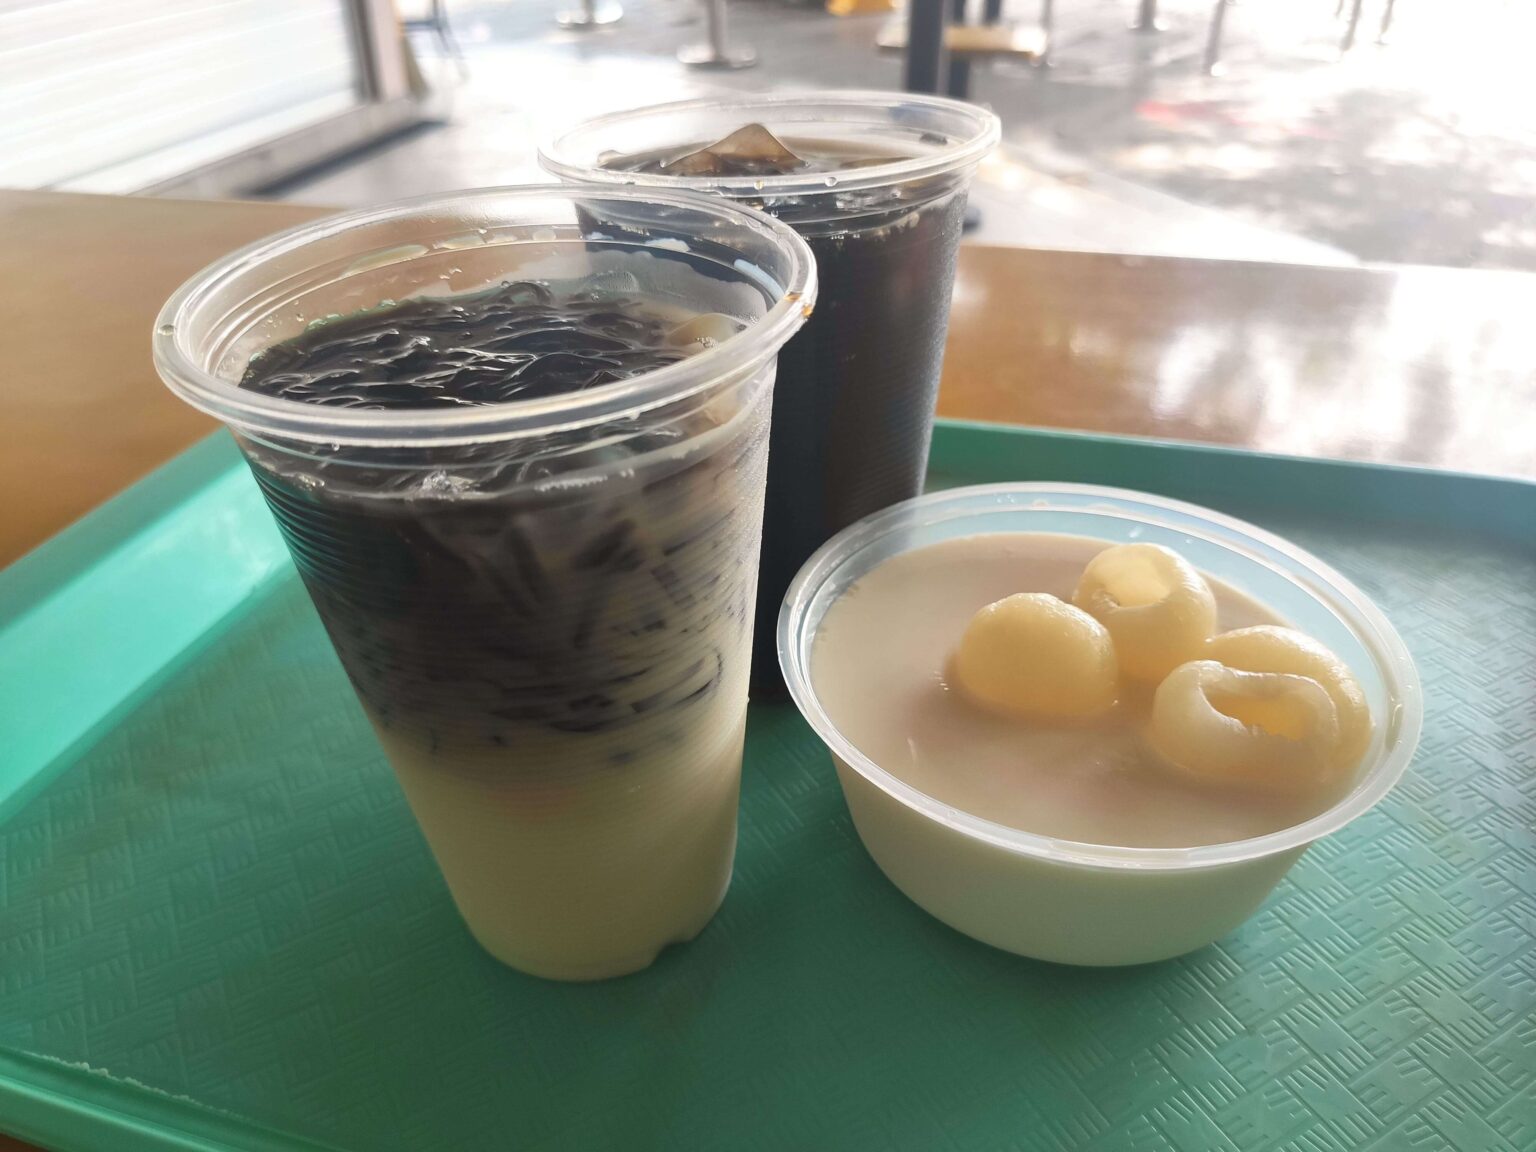 Review: House of Soya Beans (Singapore)